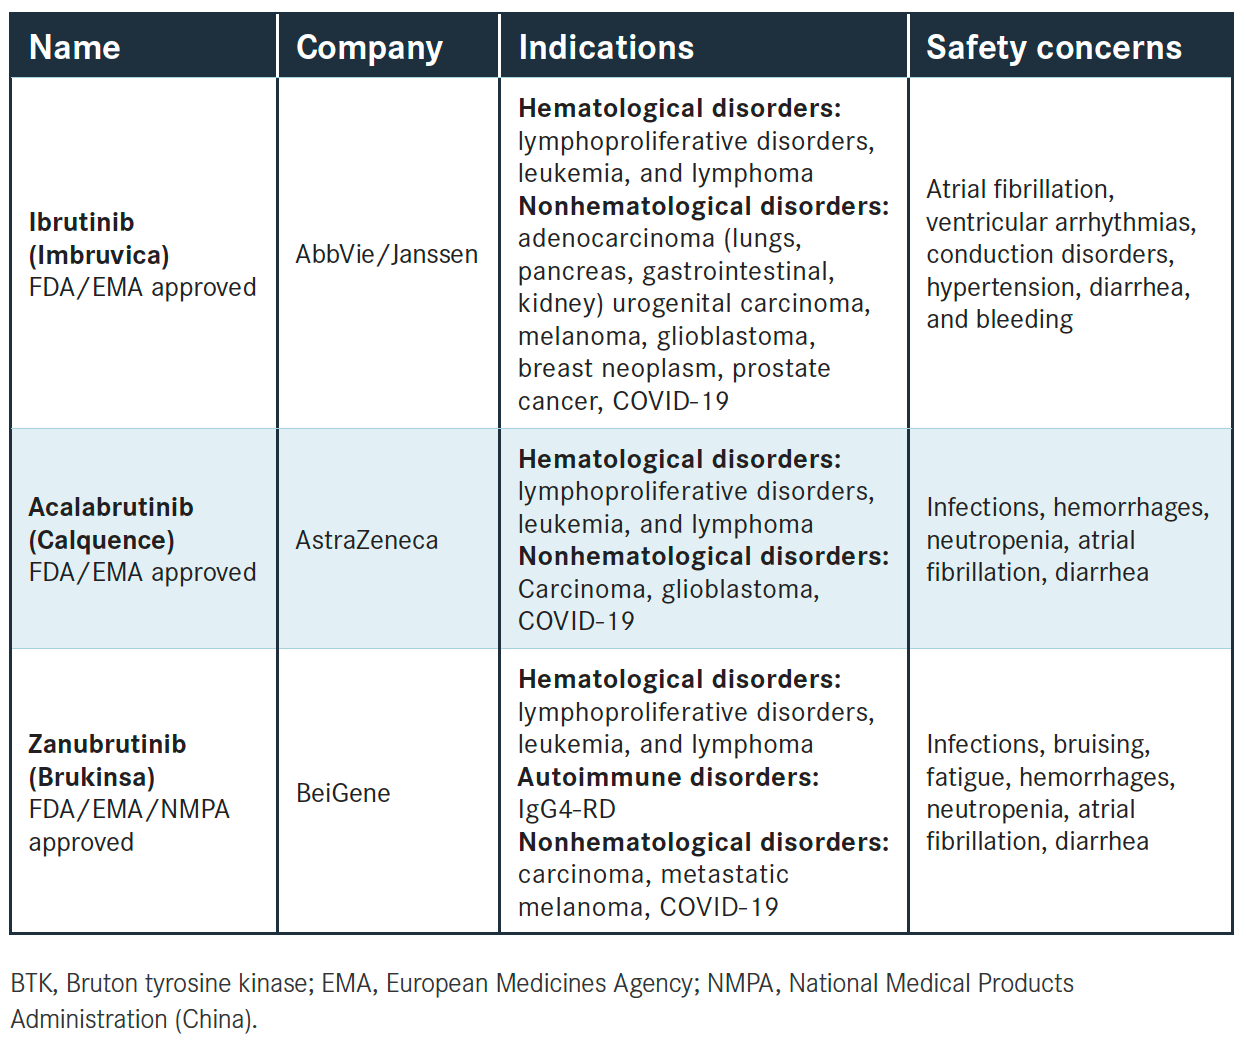 (Click to enlarge)

TABLE 2. FDA-Approved BTK Inhibitors: Indications and Select Safety Concerns